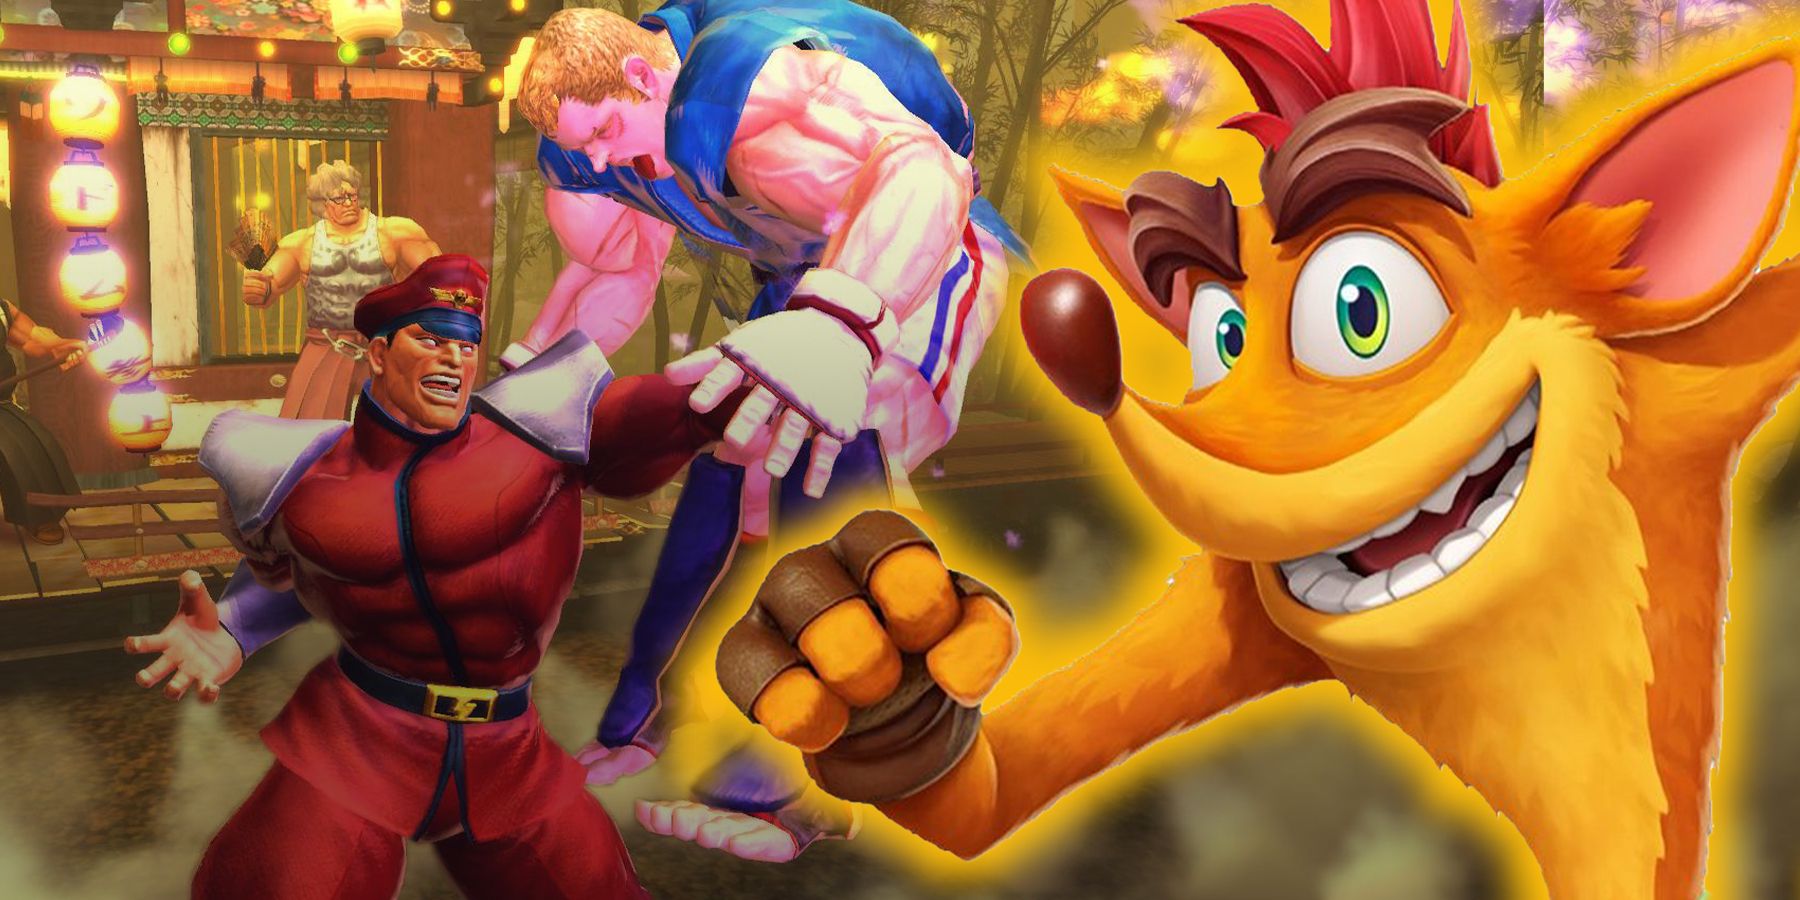 M. Bison punching Abel in Ultra Street Fighter IV with a smiling Crash Bandicoot from Crash Bandicoot 4: It's about Time